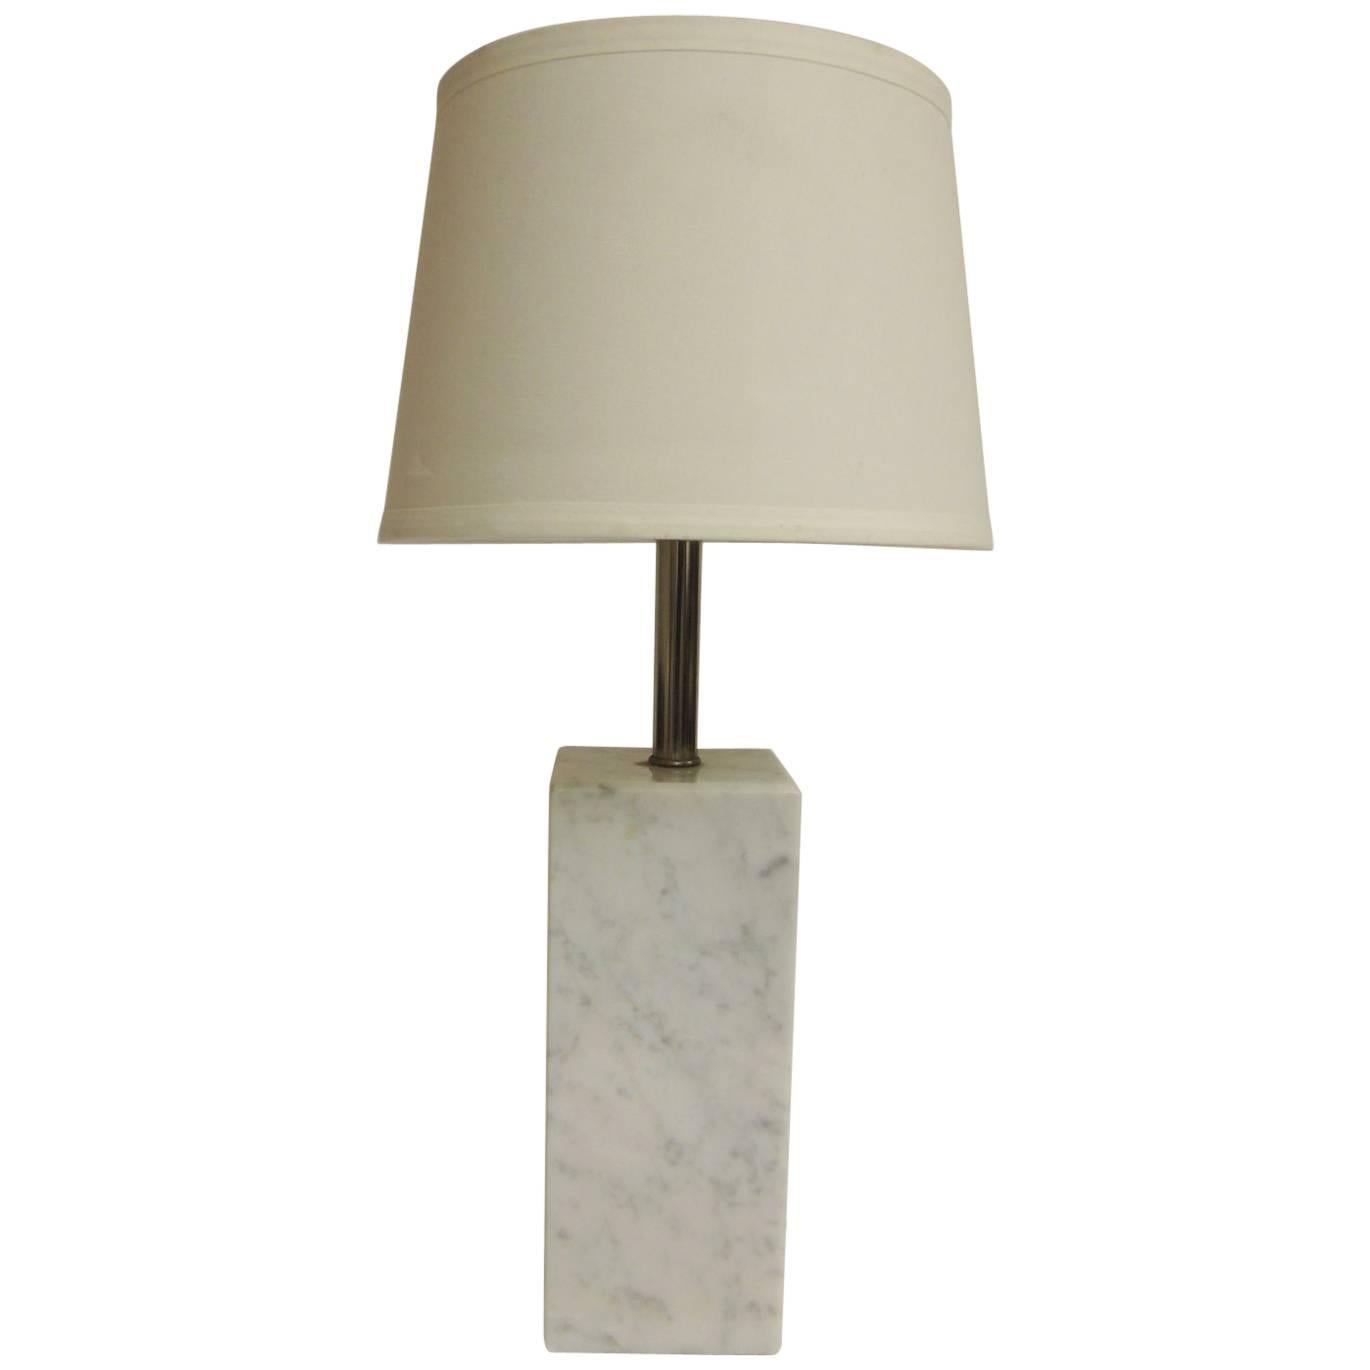 CLOSE OUT SALE: Mid-Century Modern Architectural Square Marble Column Table Lamp